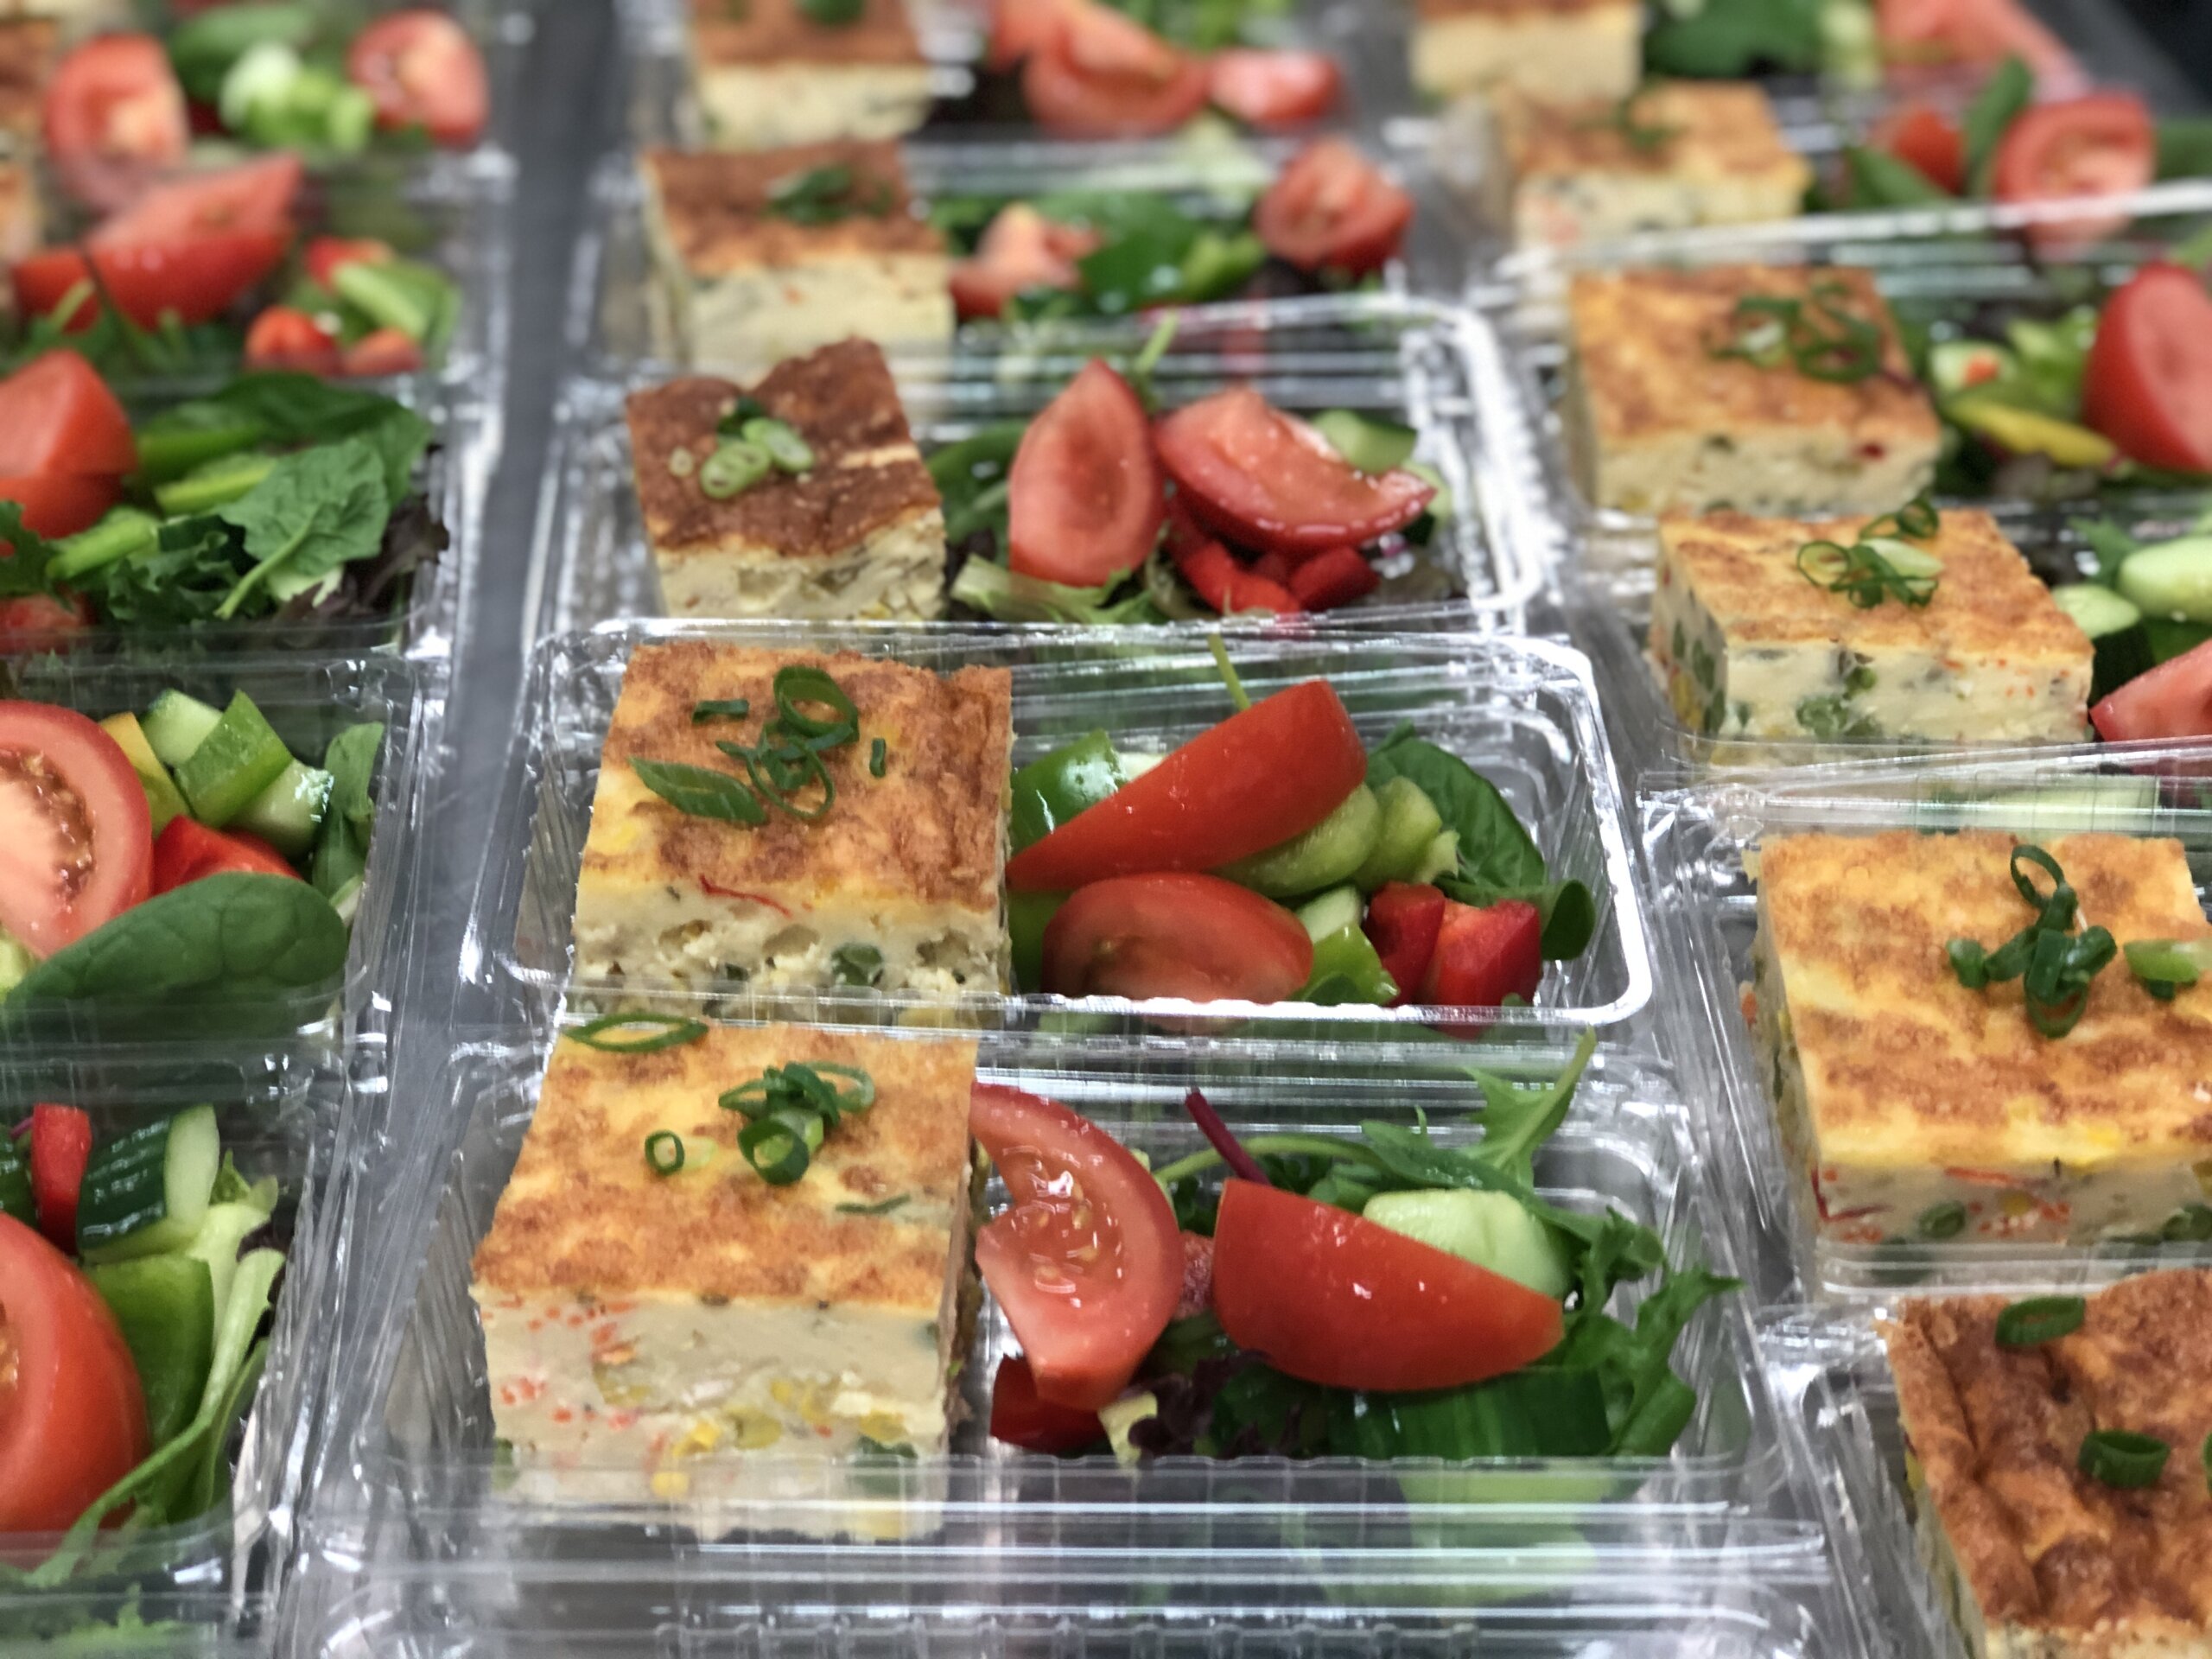 Cherry's Catering Frittata & Salad lunch catering option